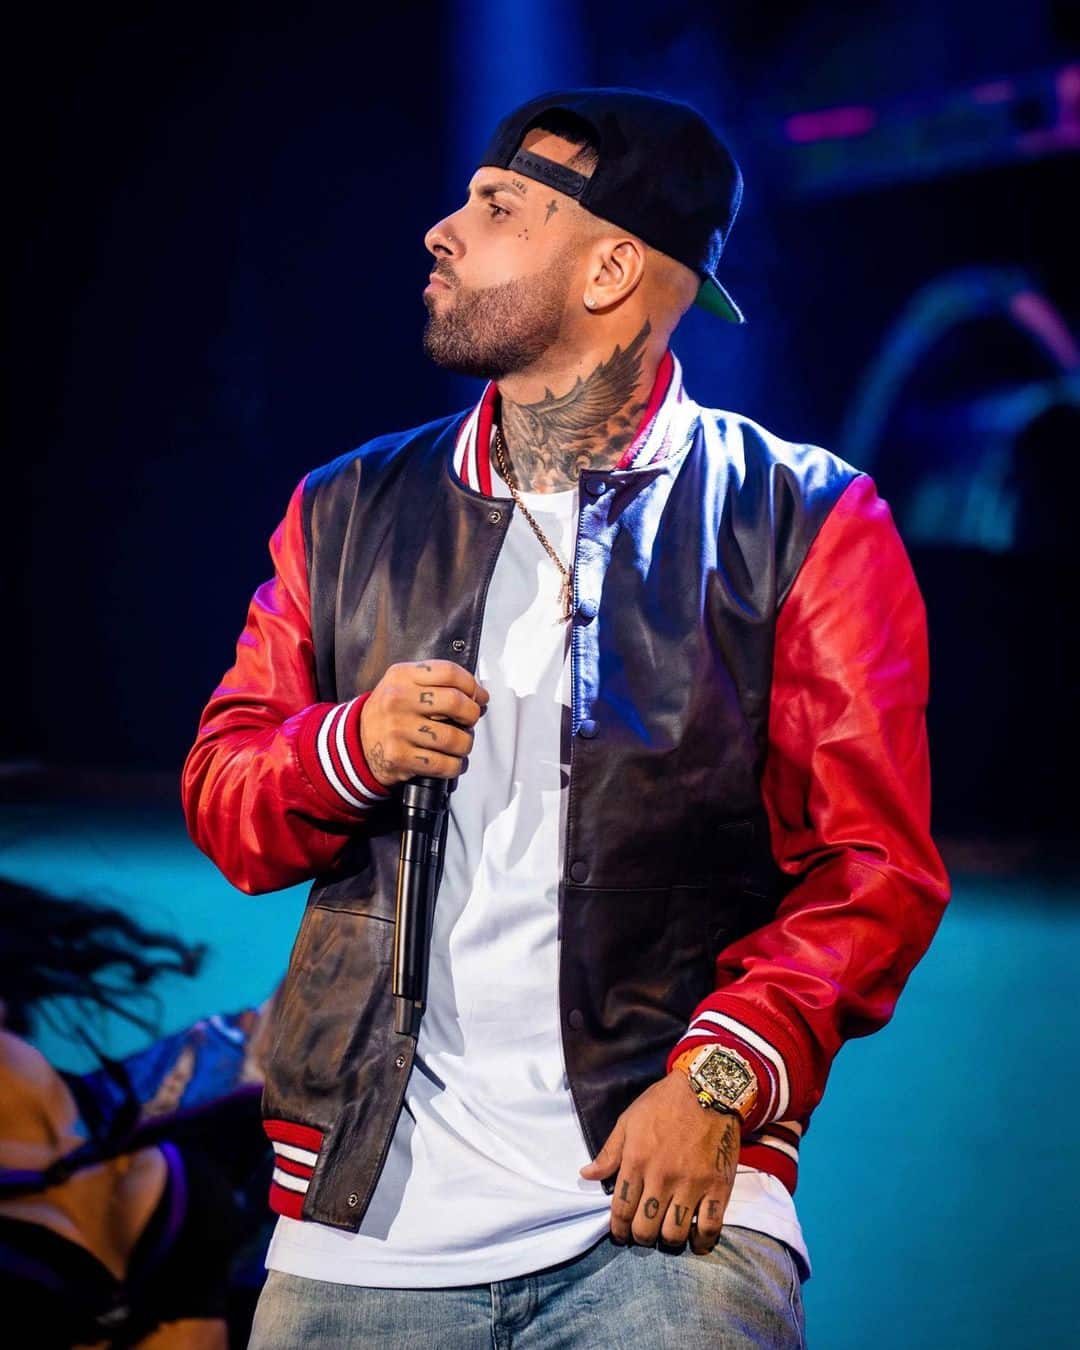 Nicky Jam - Biography, Profile, Facts and Career